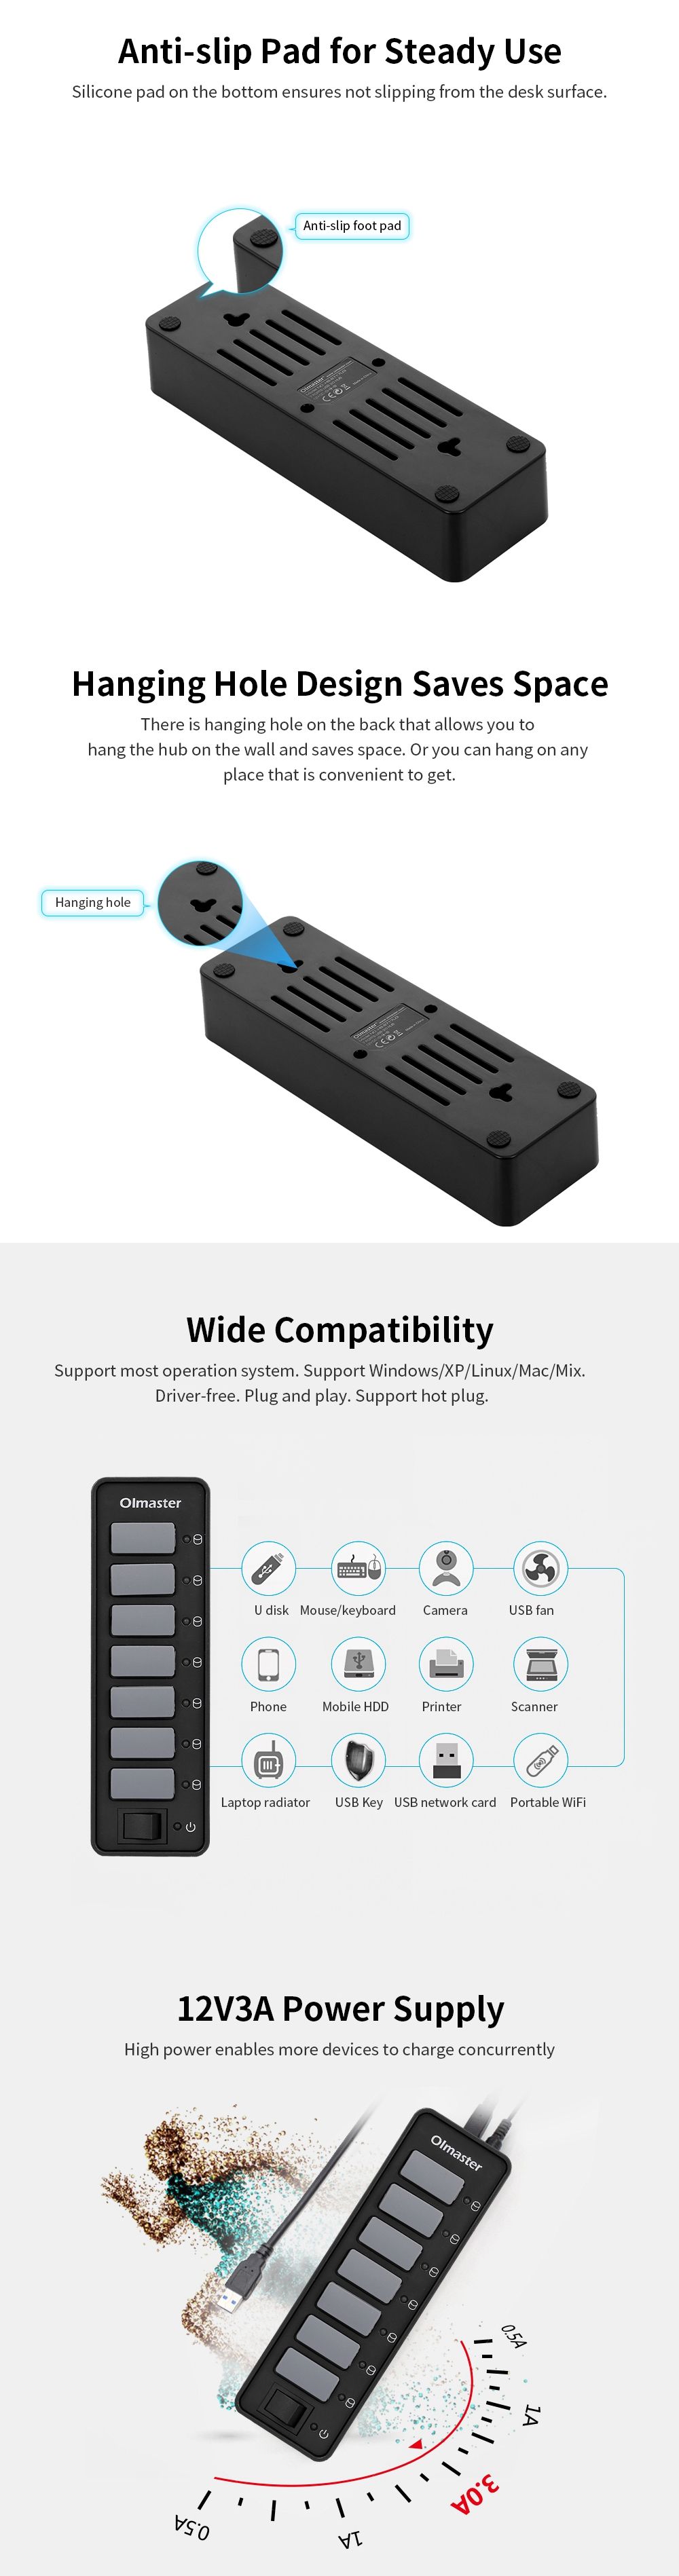 OImaster-HB-8717U3-USB30-7-Ports-Adapter-5Gbps-with-Dustproof-Cap-Switch-Connector-USB-Hub-for-PC-La-1606322